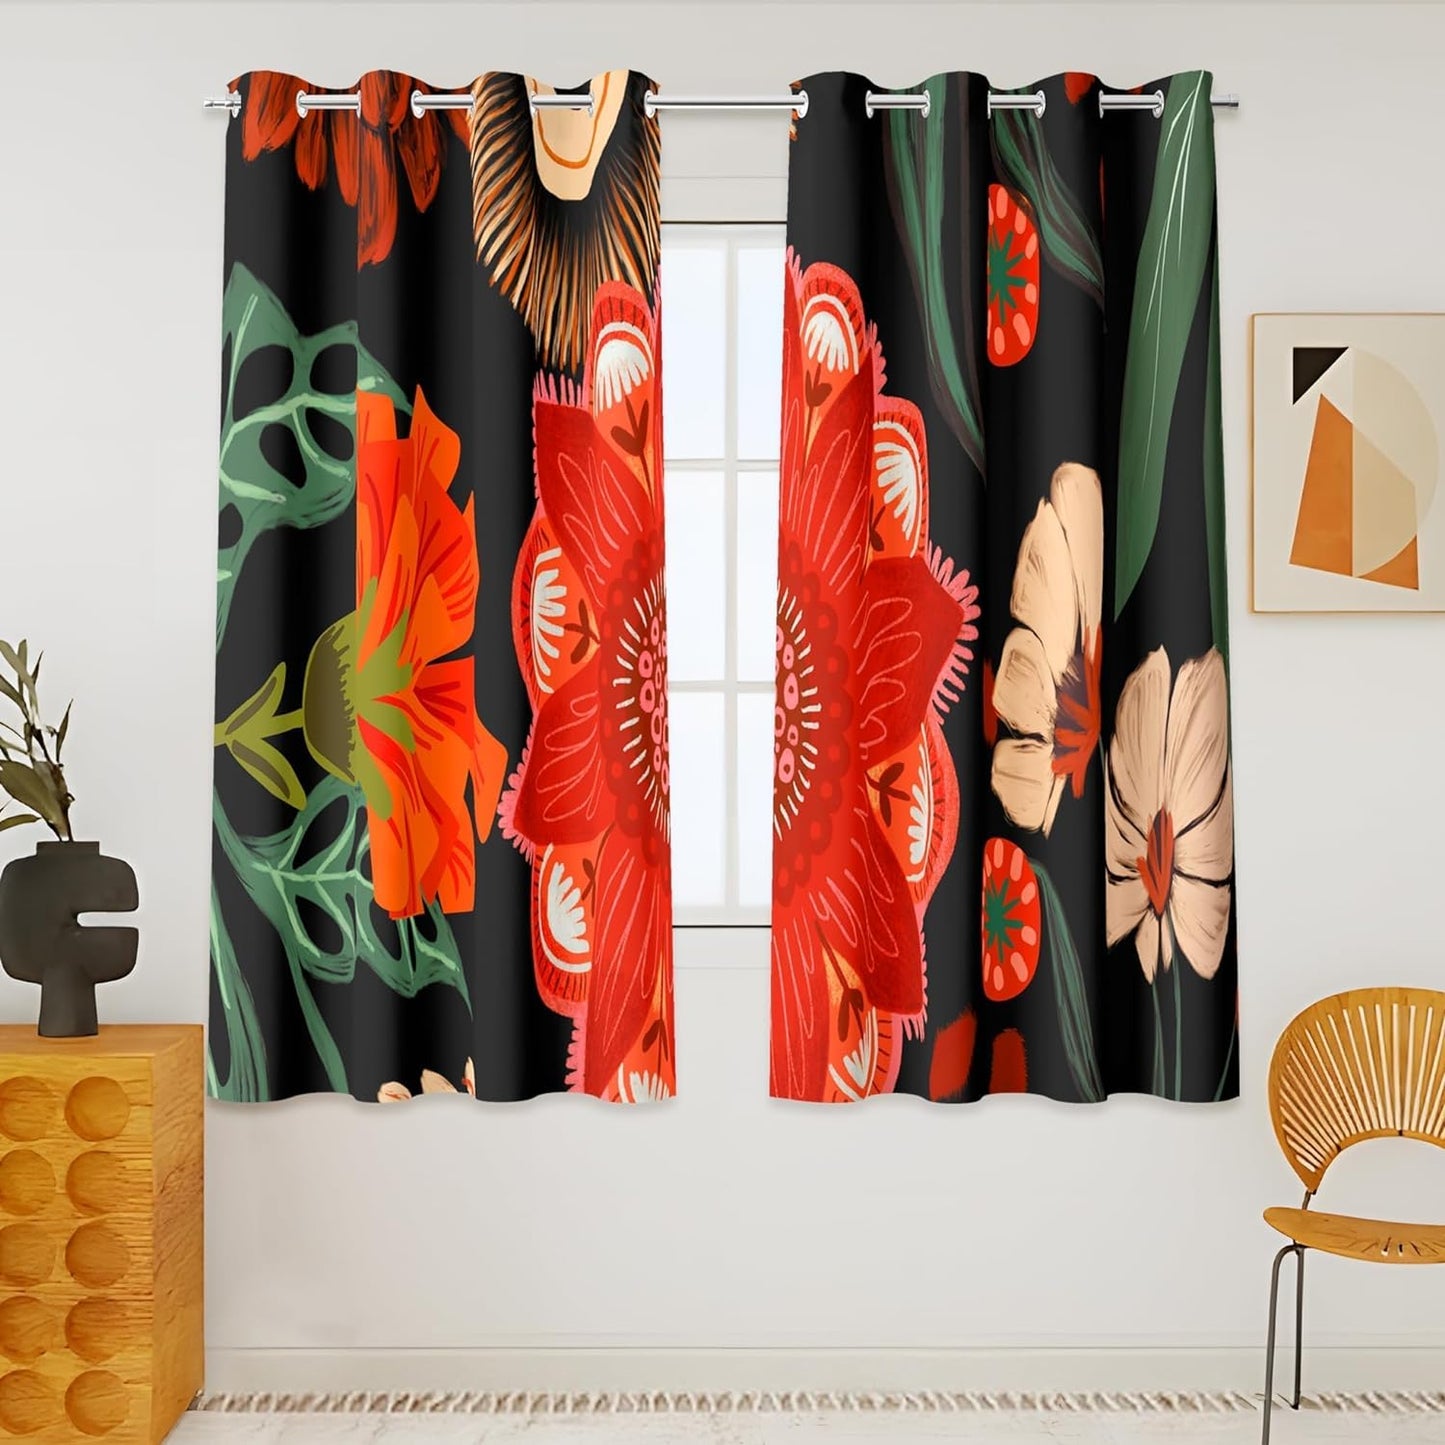 Boho Floral 100% Blackout Curtains for Living Room 96 Inch Long 2 Panels Mid Century Botanical Black Out Curtains for Bedroom Grommet Thermal Insulated Room Darkening Window Drapes,52Wx96L  Tyrot Black Boho Floral Print 52W X 45L Inch X 2 Panels 